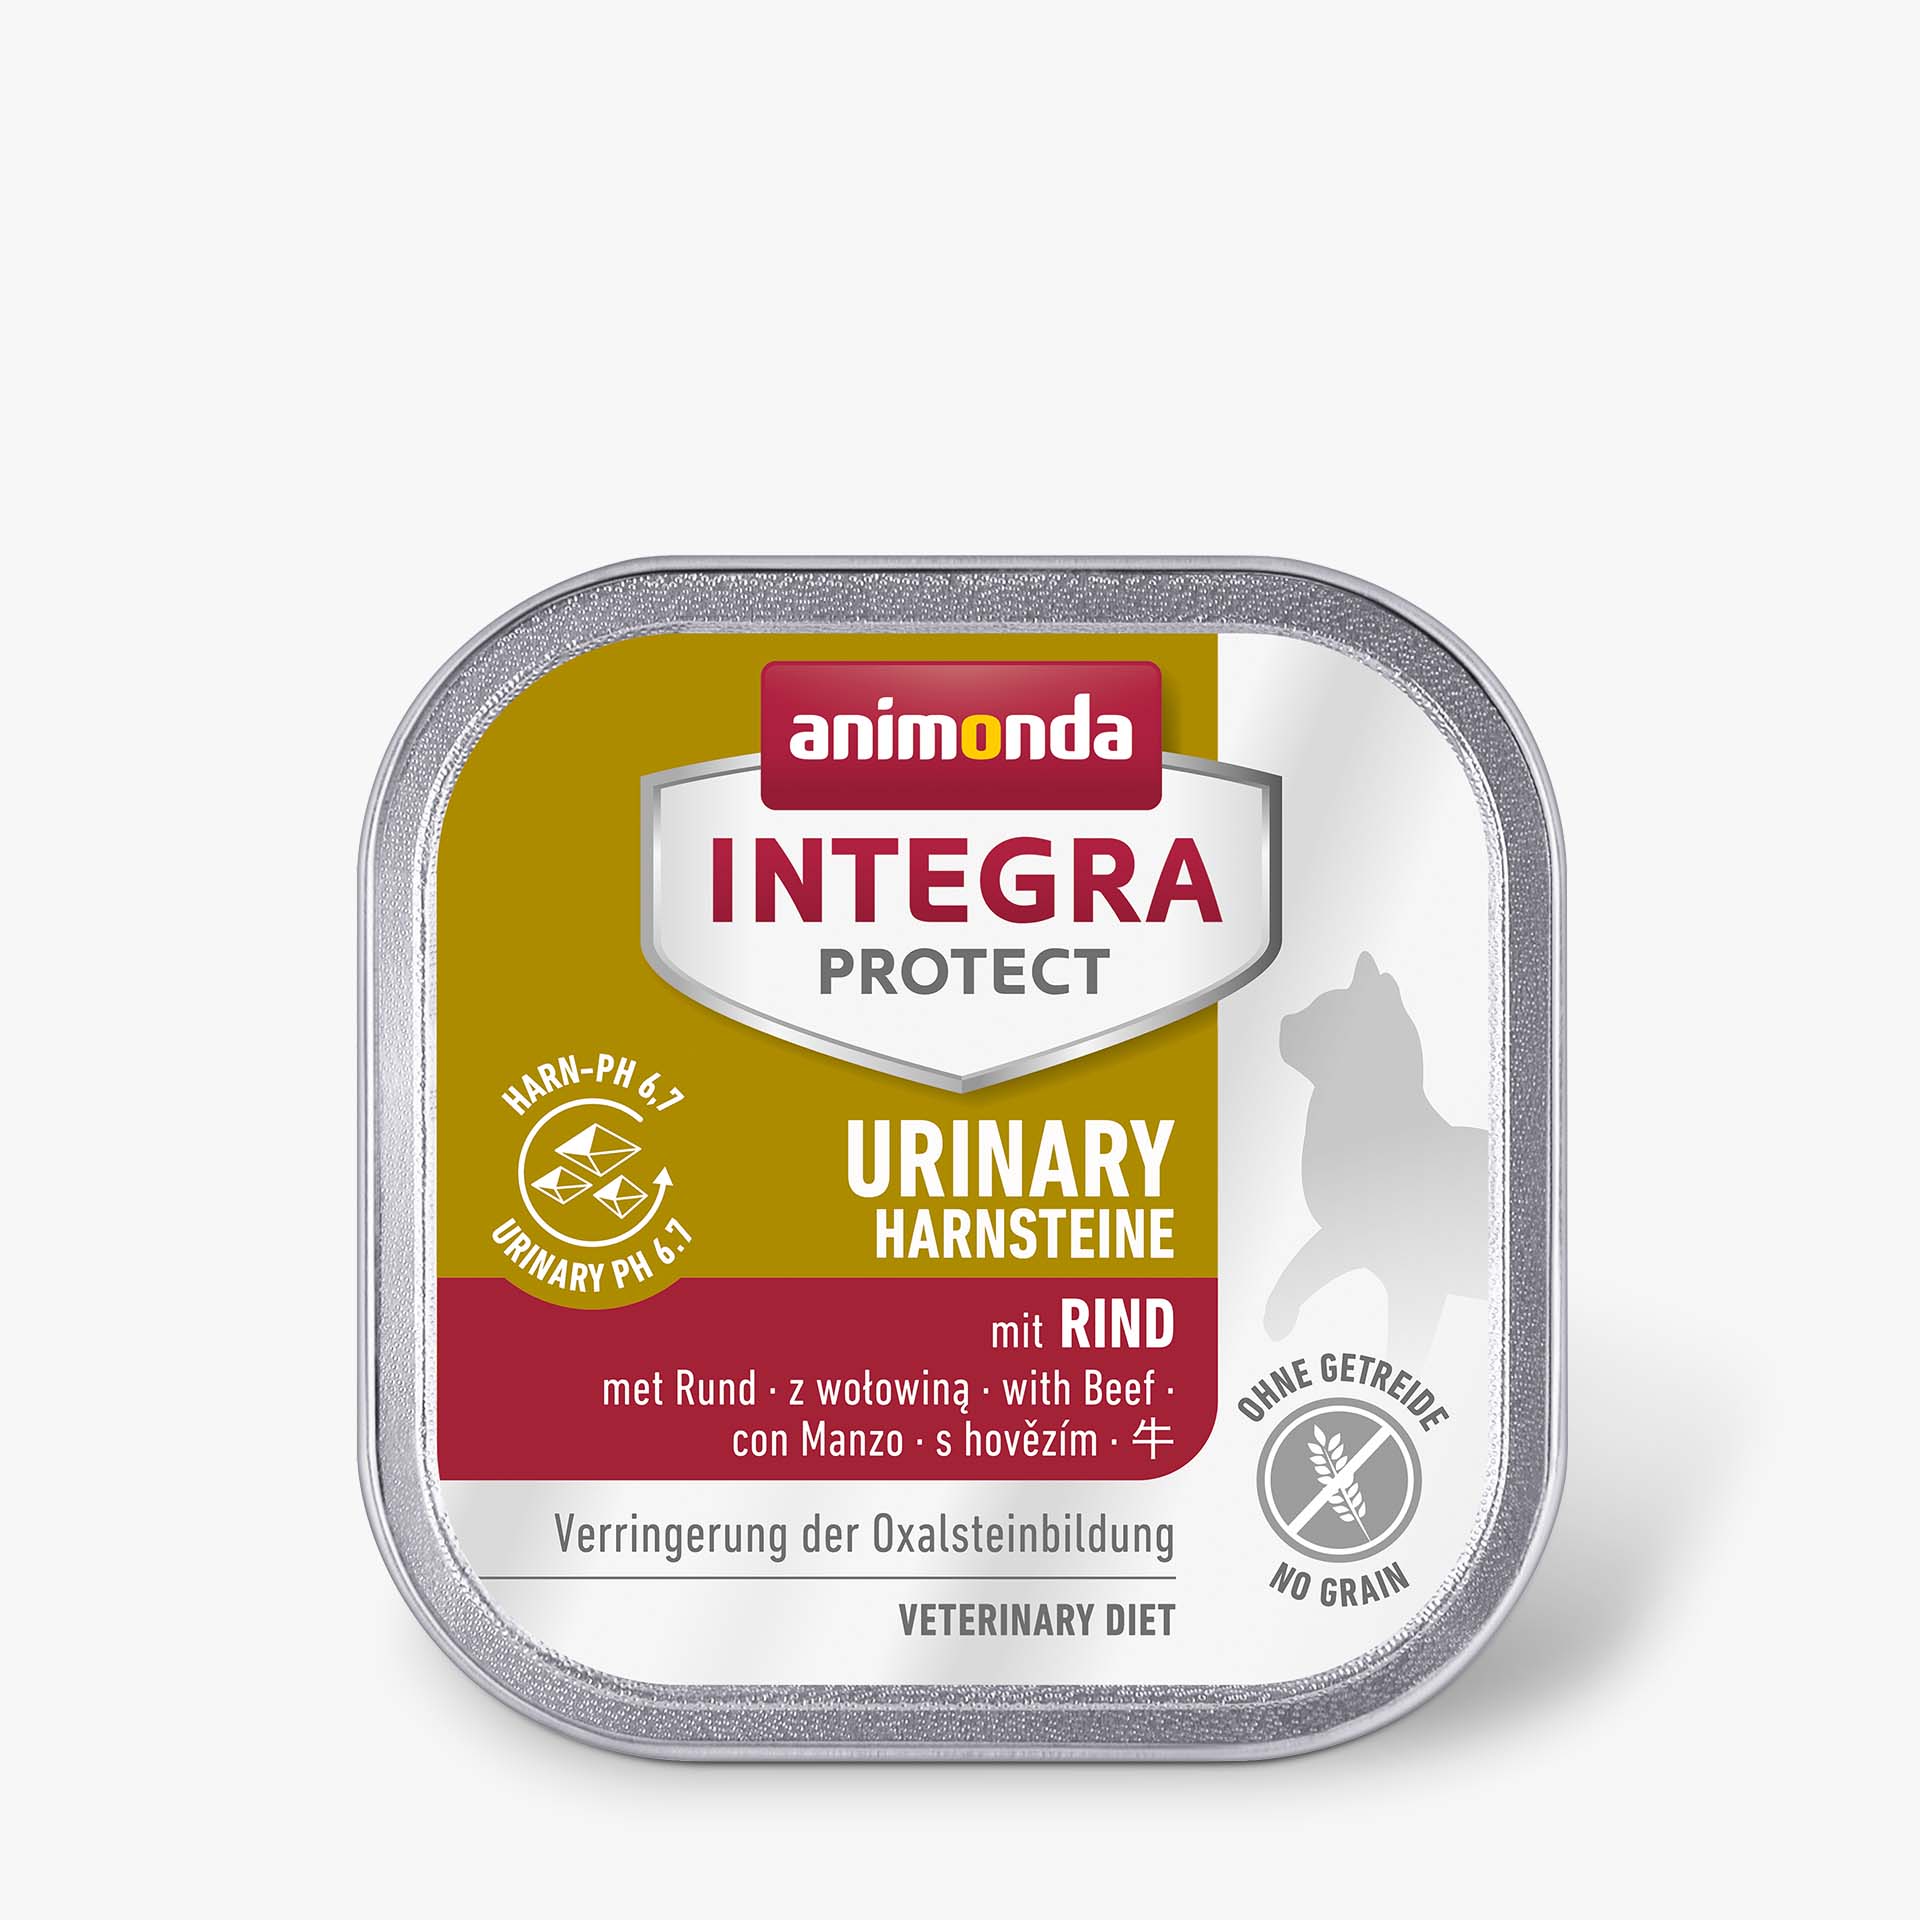 INTEGRA PROTECT with Beef Urinary oxalate stones